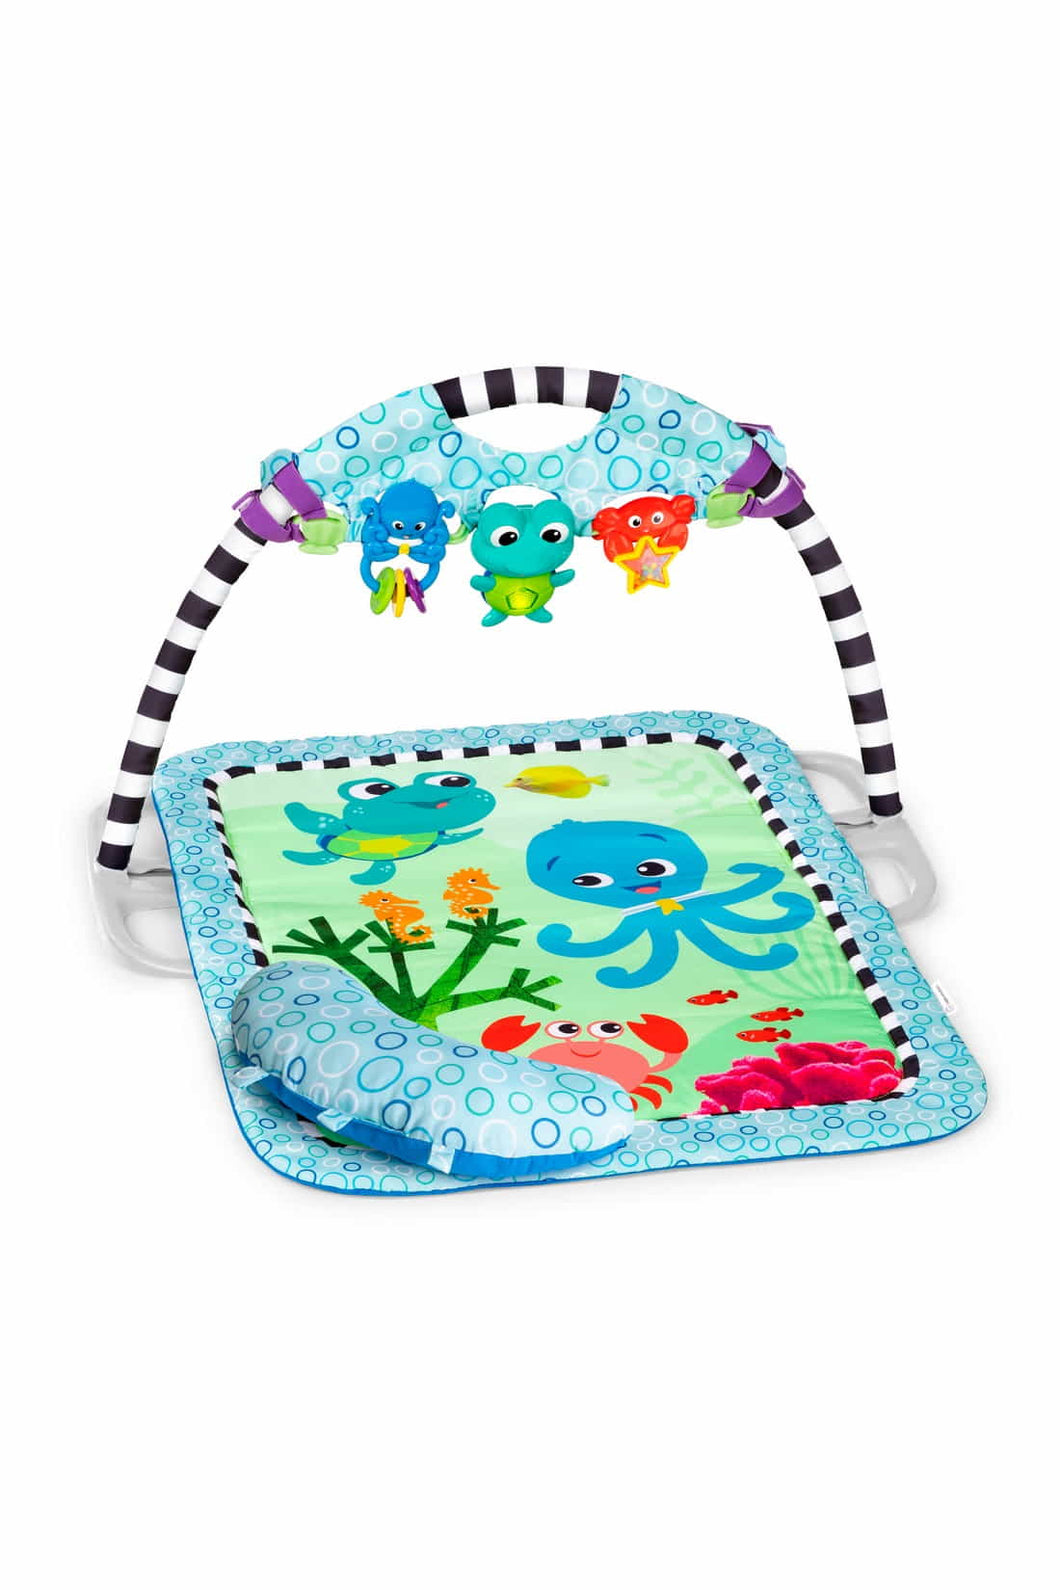 Baby Einstein Neptune's Discovery Reef Play Gym & Take-Along Toy Bar 1